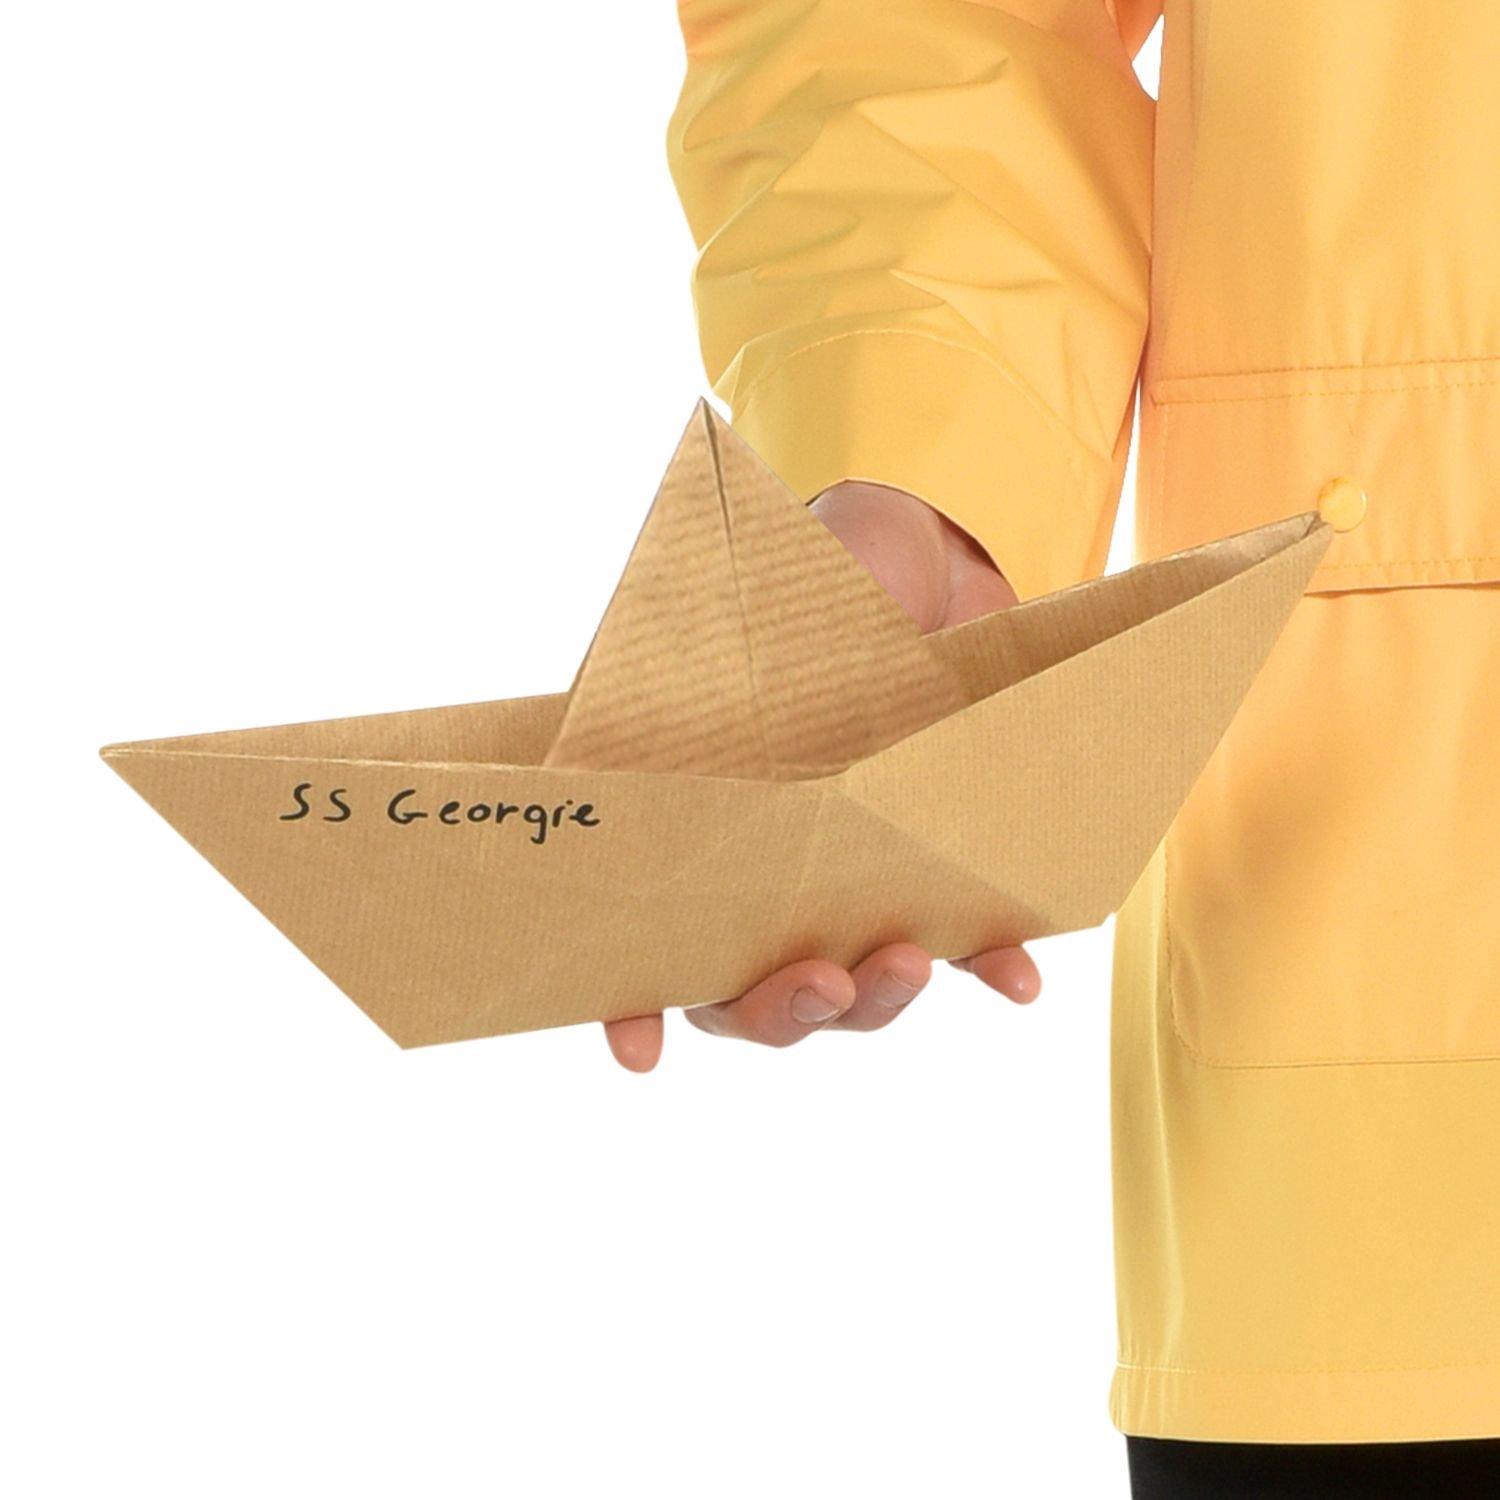 Georgie's Yellow Raincoat Costume from It | Party City